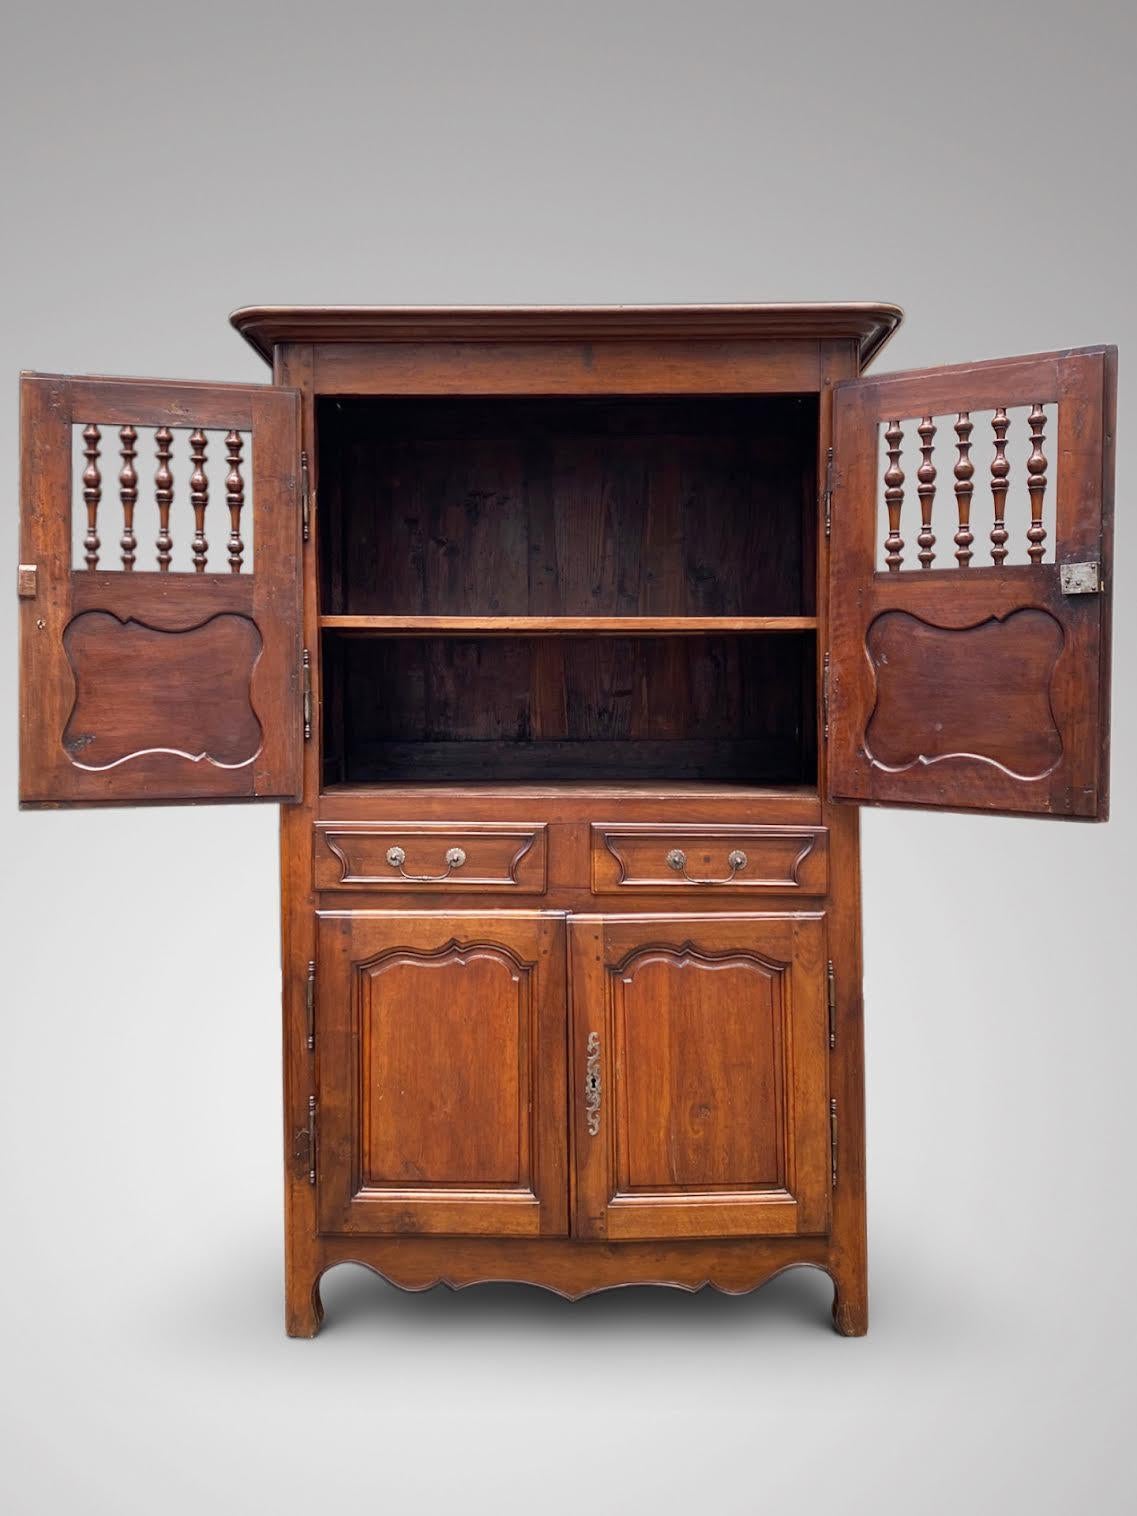 French Provincial Stunning French Mangeadou or Pantry in Walnut from the Provence